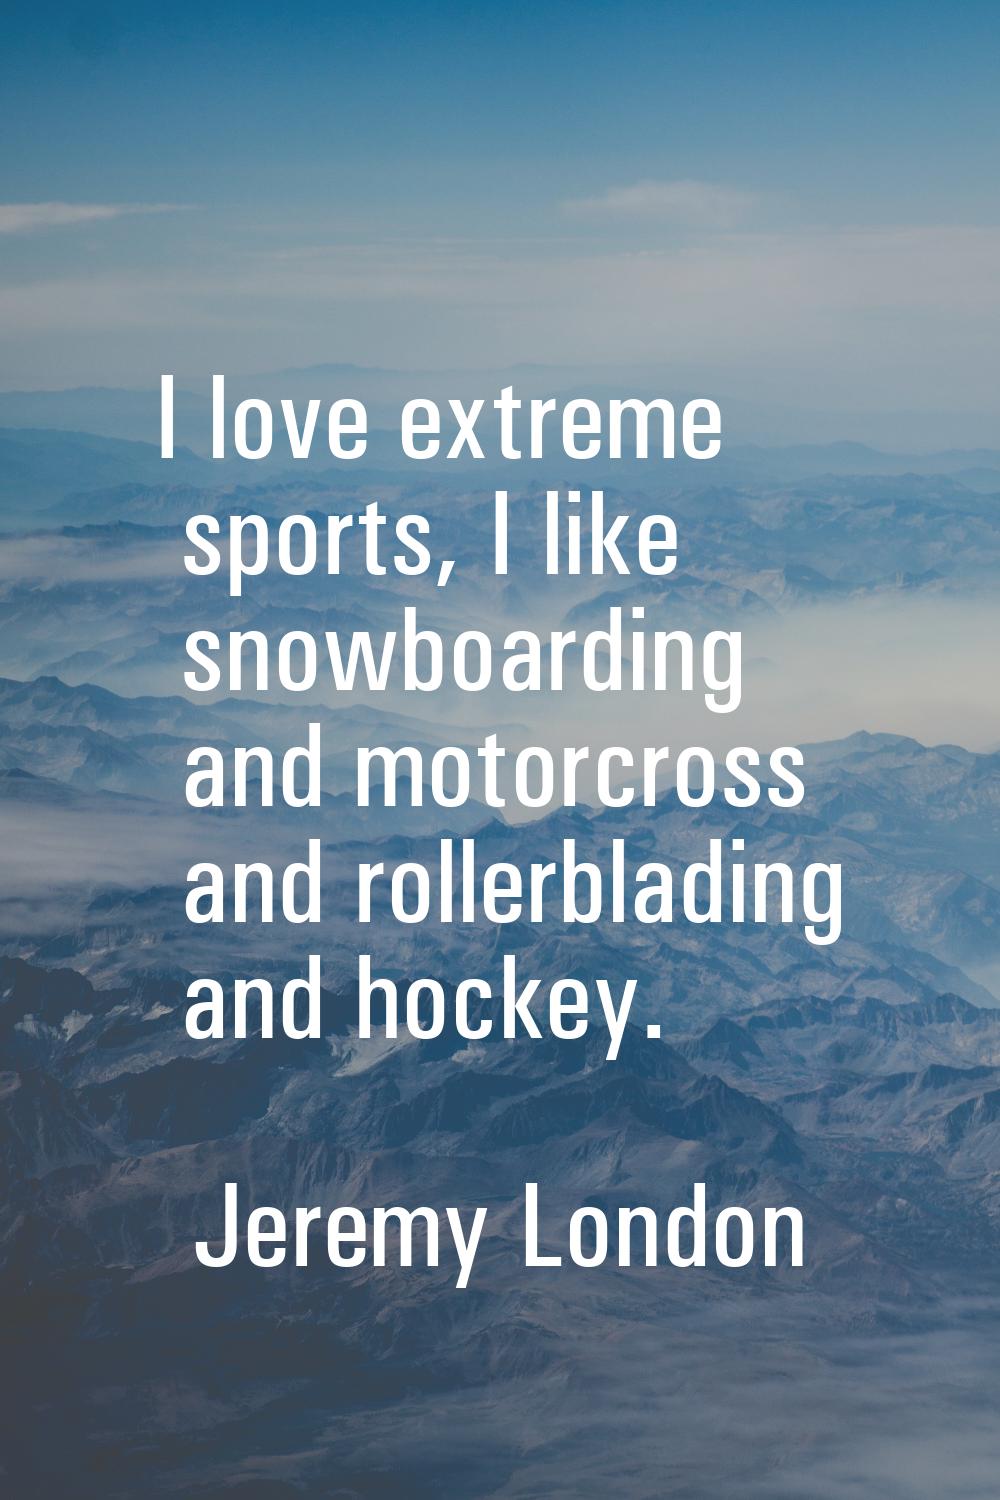 I love extreme sports, I like snowboarding and motorcross and rollerblading and hockey.